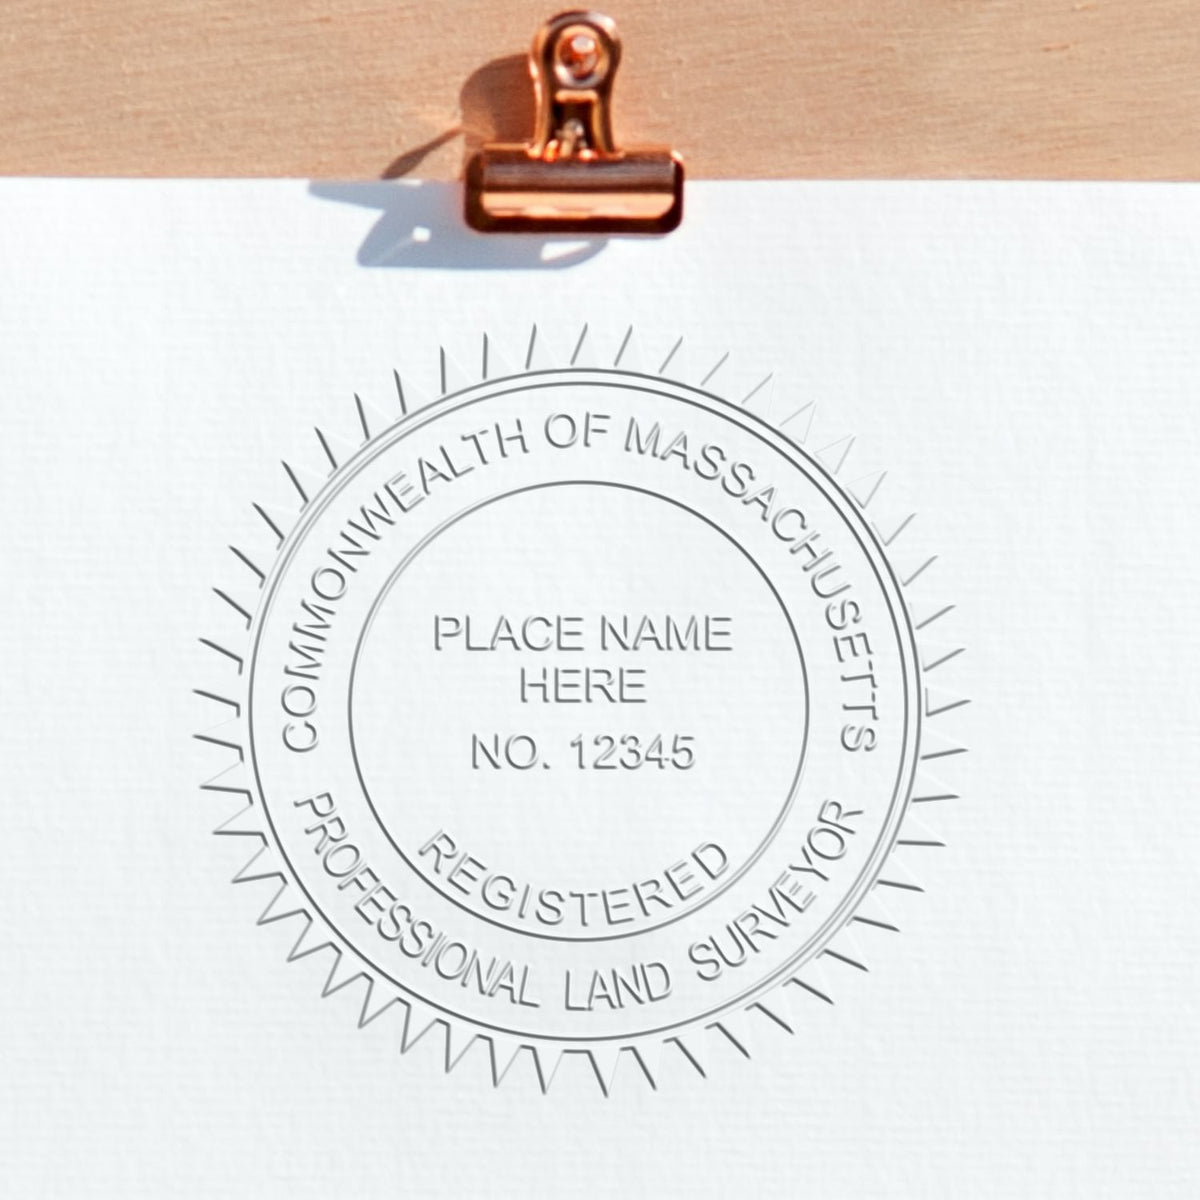 A photograph of the State of Massachusetts Soft Land Surveyor Embossing Seal stamp impression reveals a vivid, professional image of the on paper.